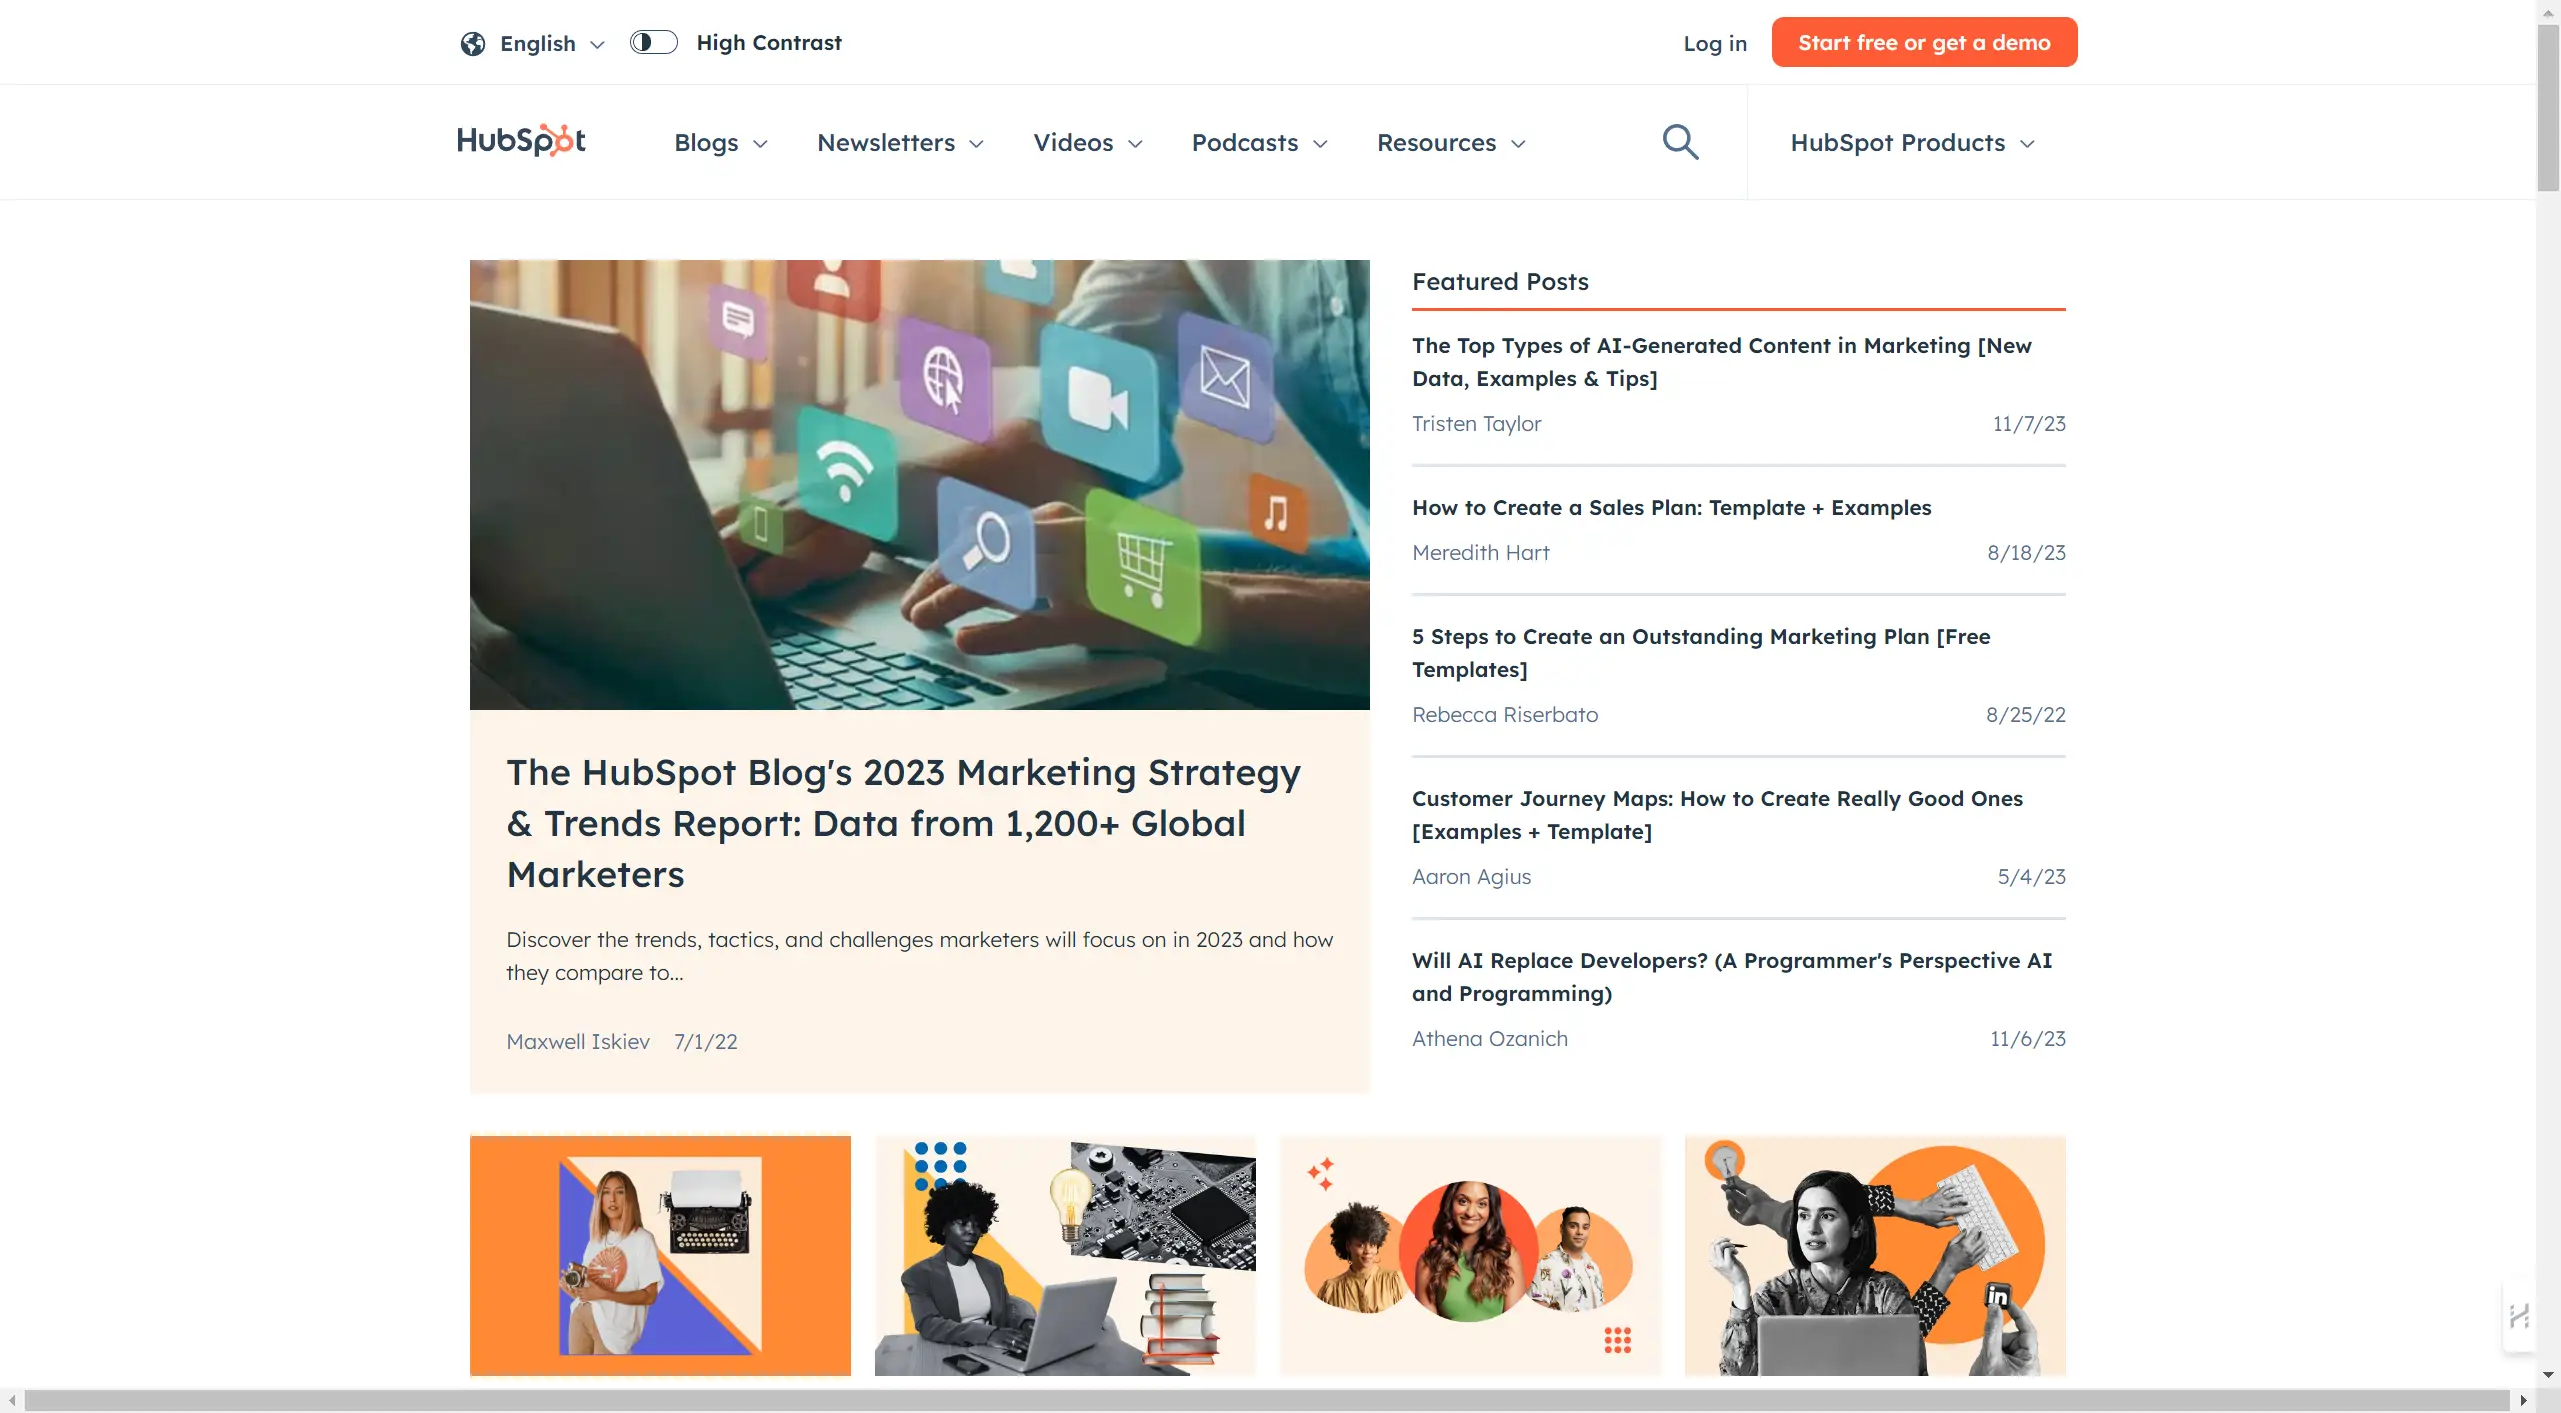 HubSpot Blog Landing Page showing all the articles posted recently